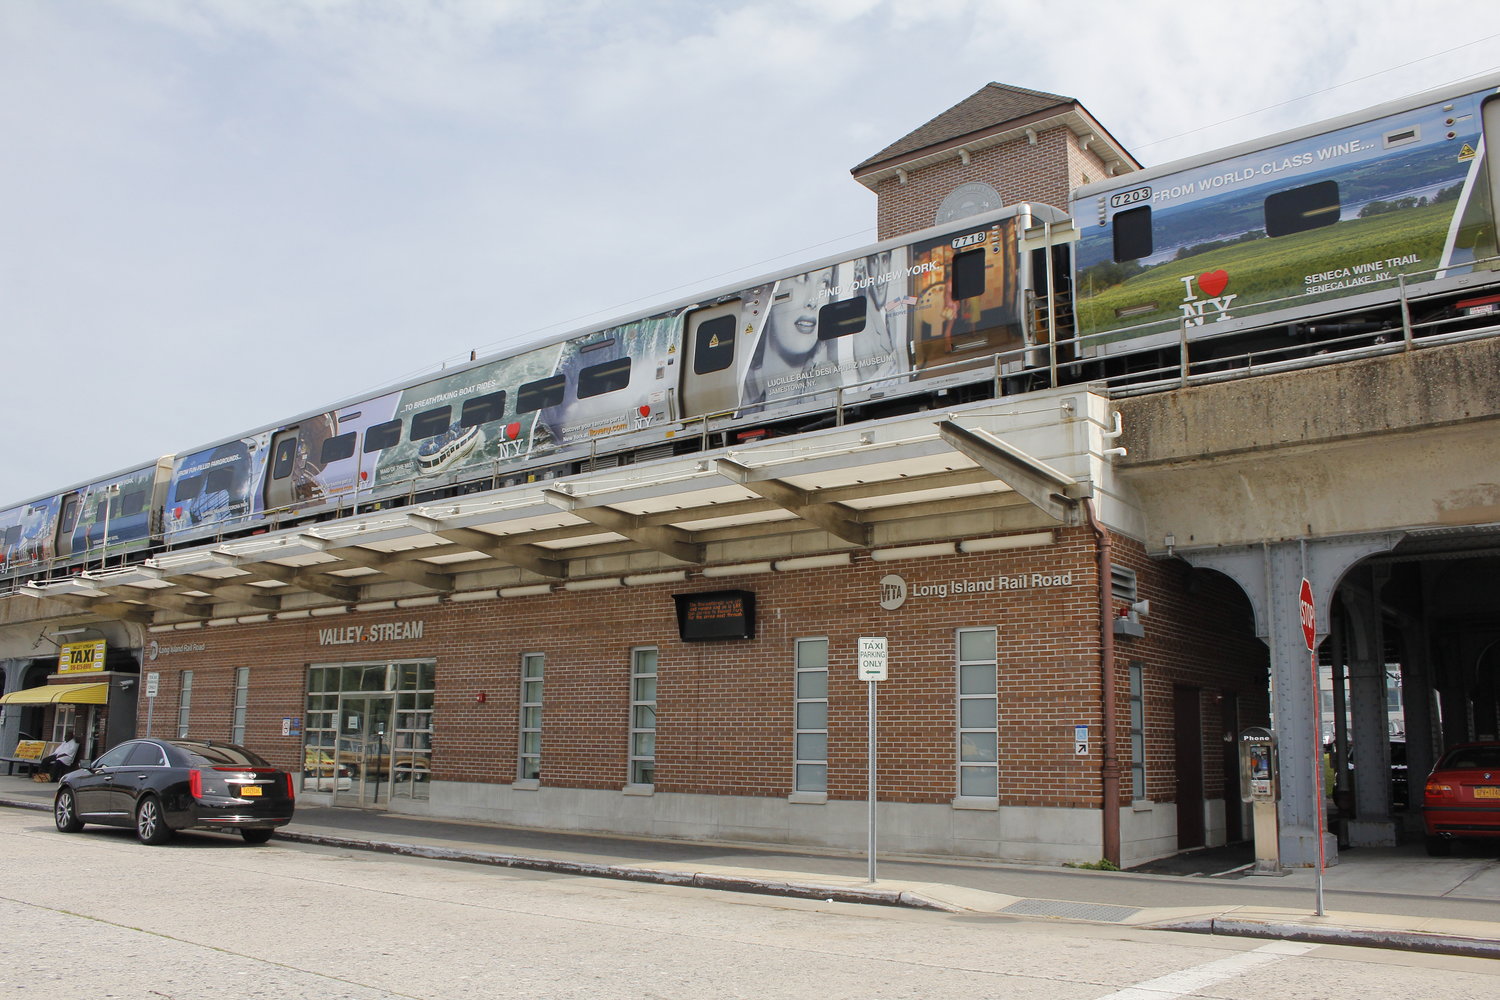 Riders have complained of dirt and decay at the Valley Stream train station despite a $5 million renovation project announced roughly two years ago.